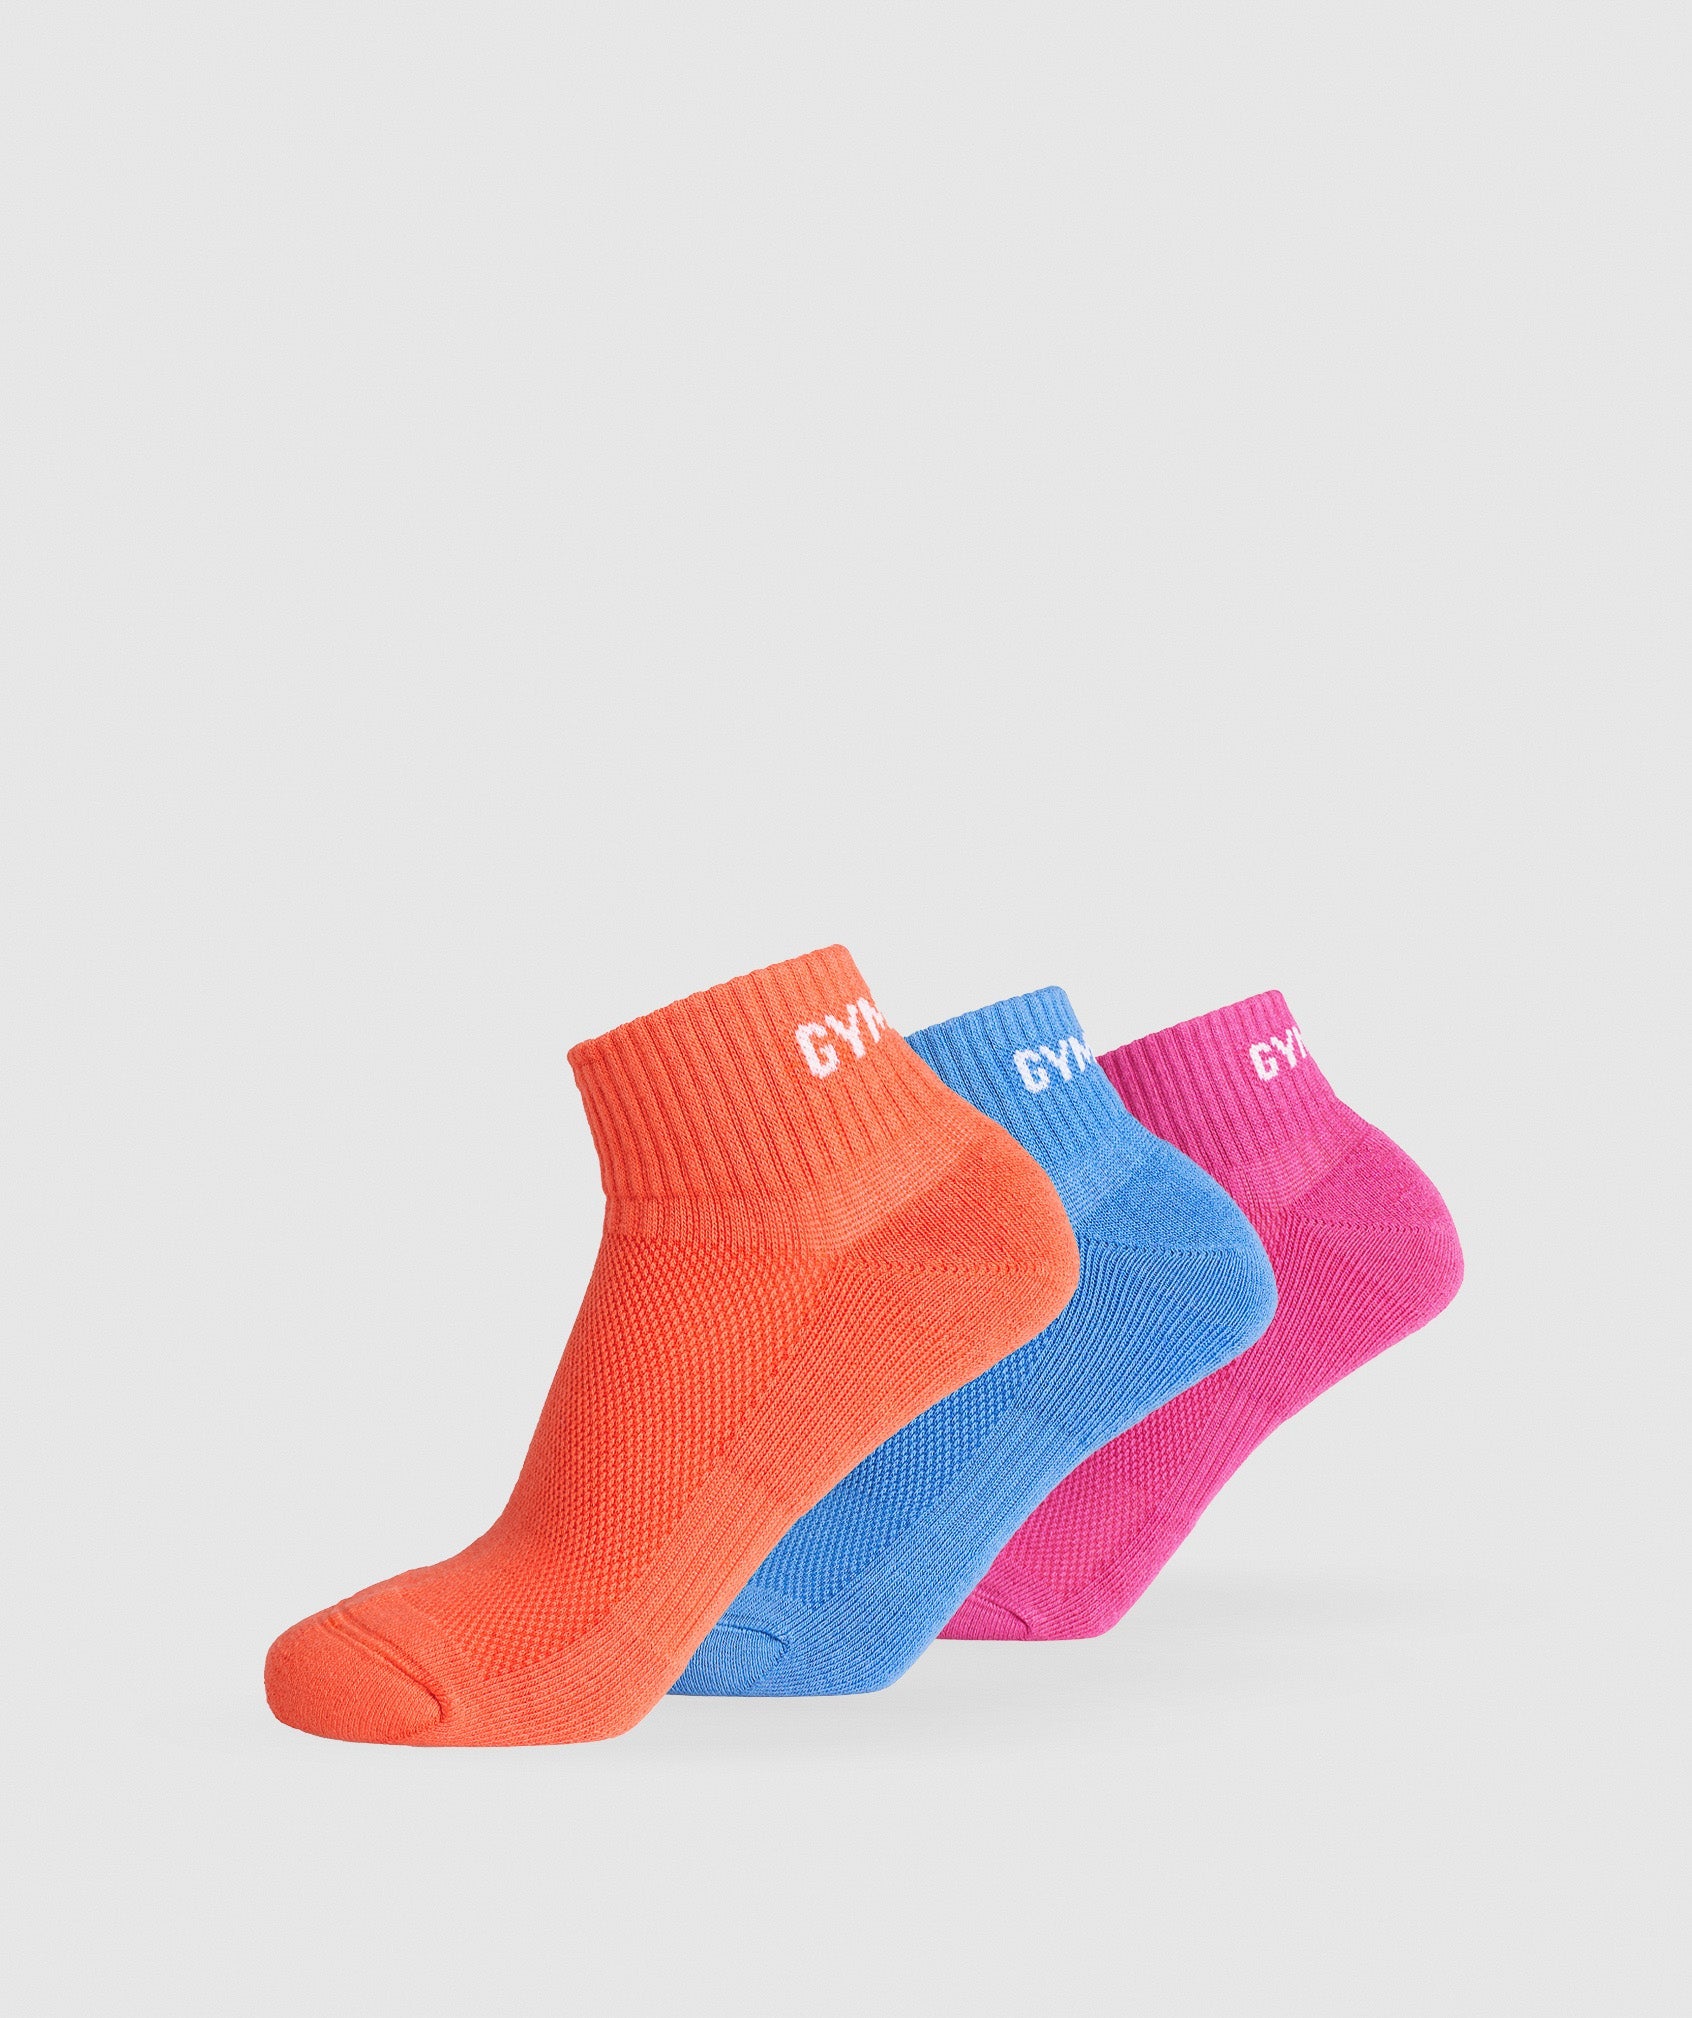 GS Jacquard Quarter Socks 3pk in {{variantColor} is out of stock